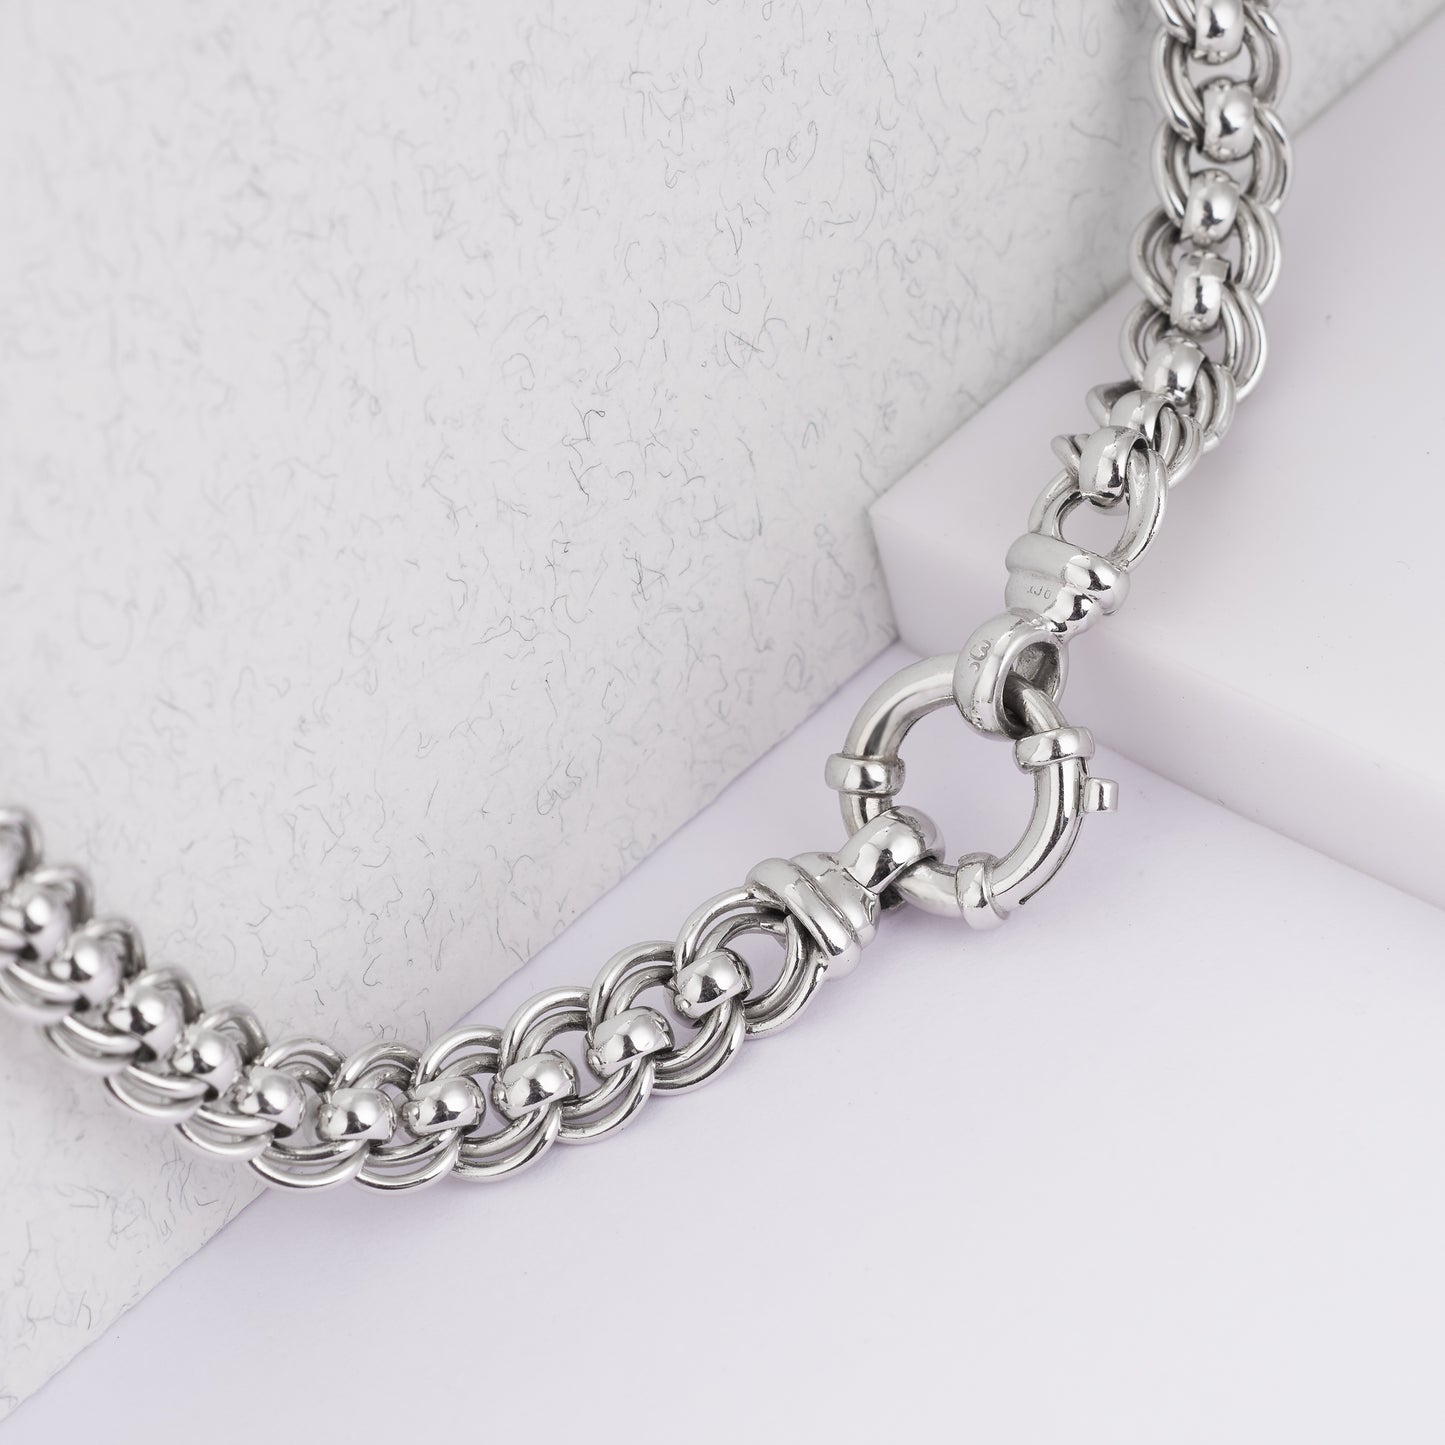 9K White Gold Solid Roller Necklace with Bolt Ring Clasp